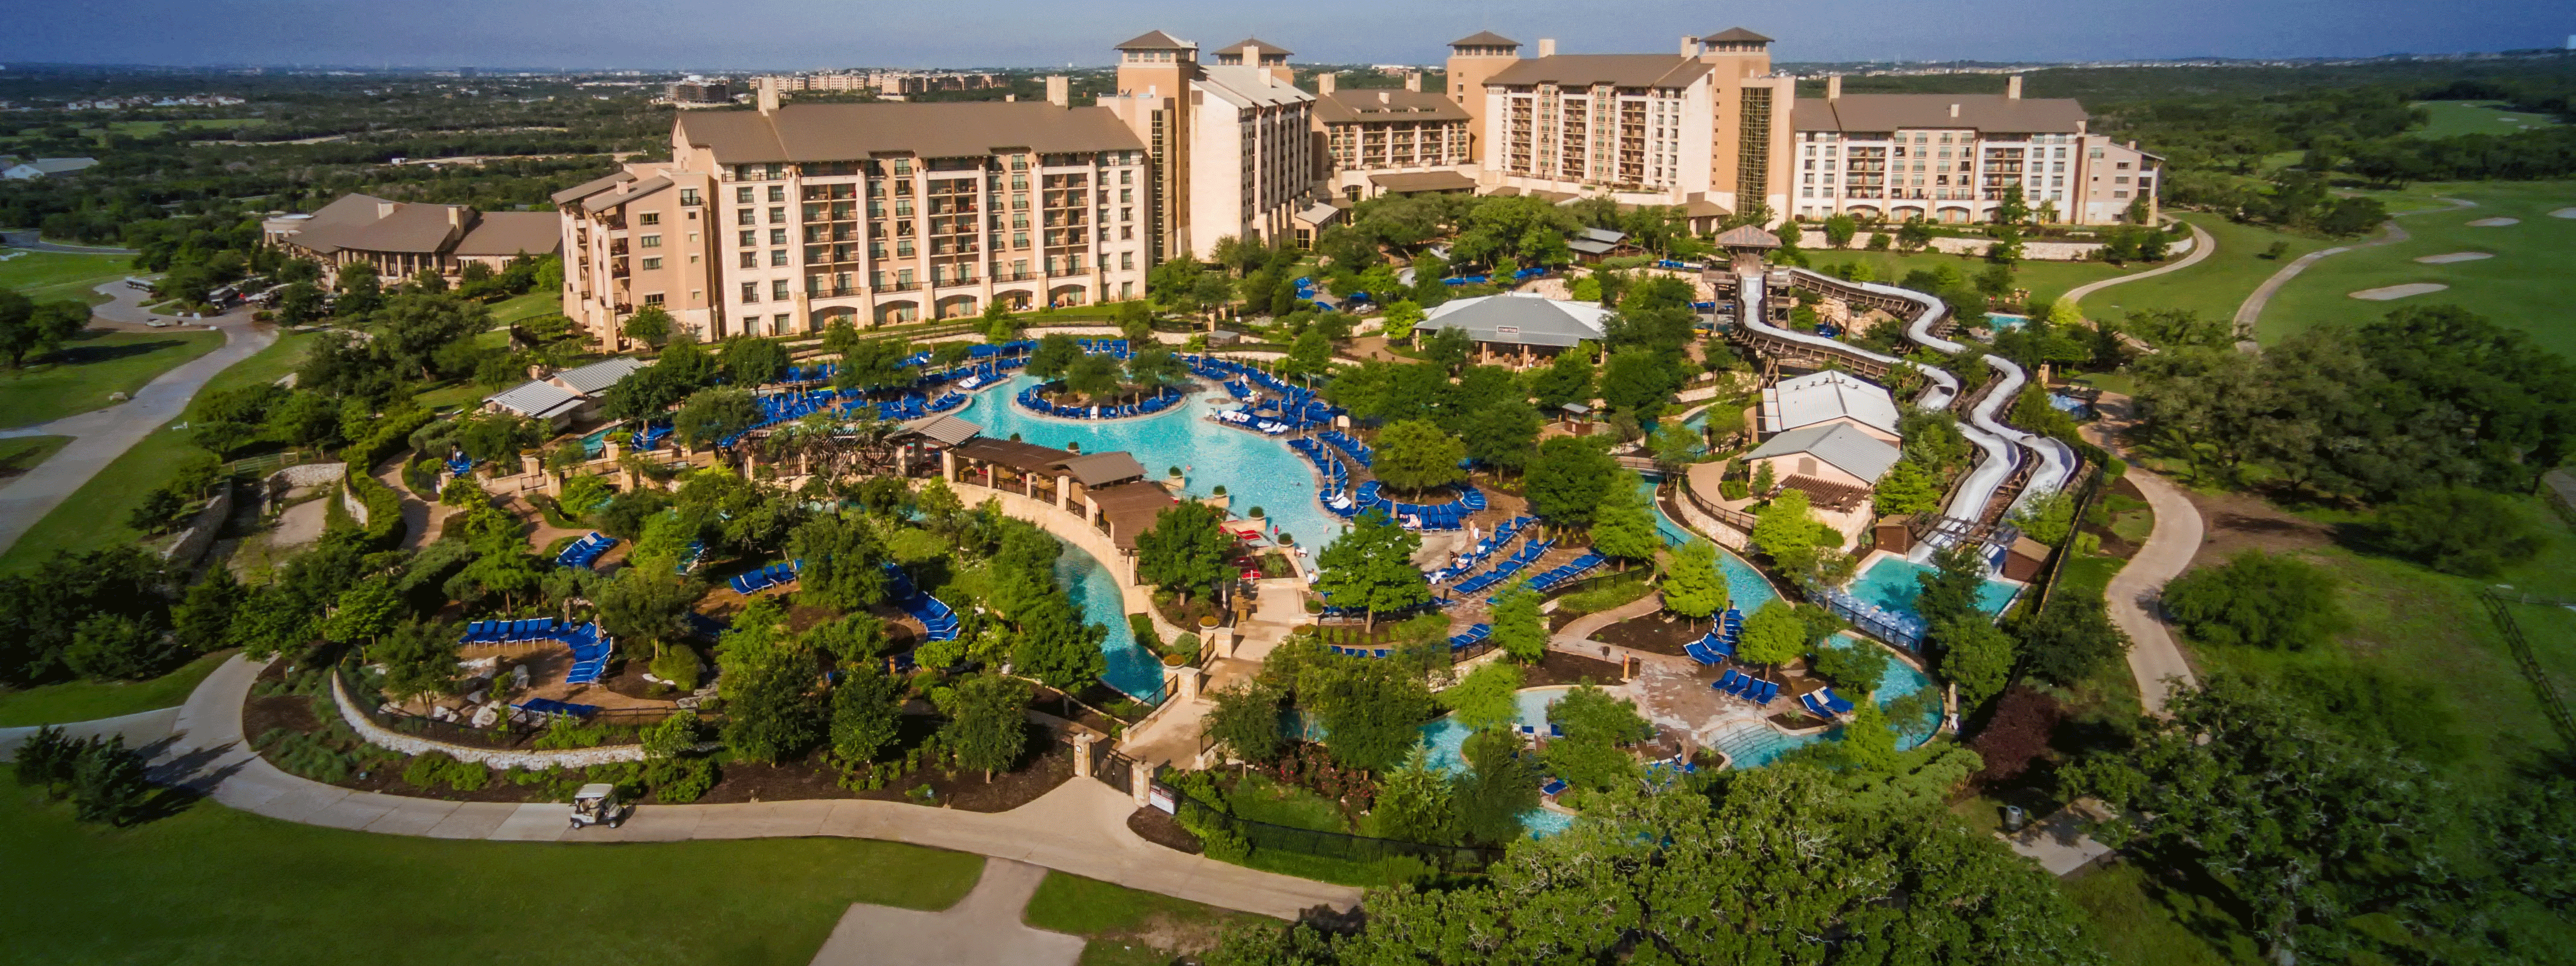 The JW Marriott San Antonio pairs relaxation with fun.